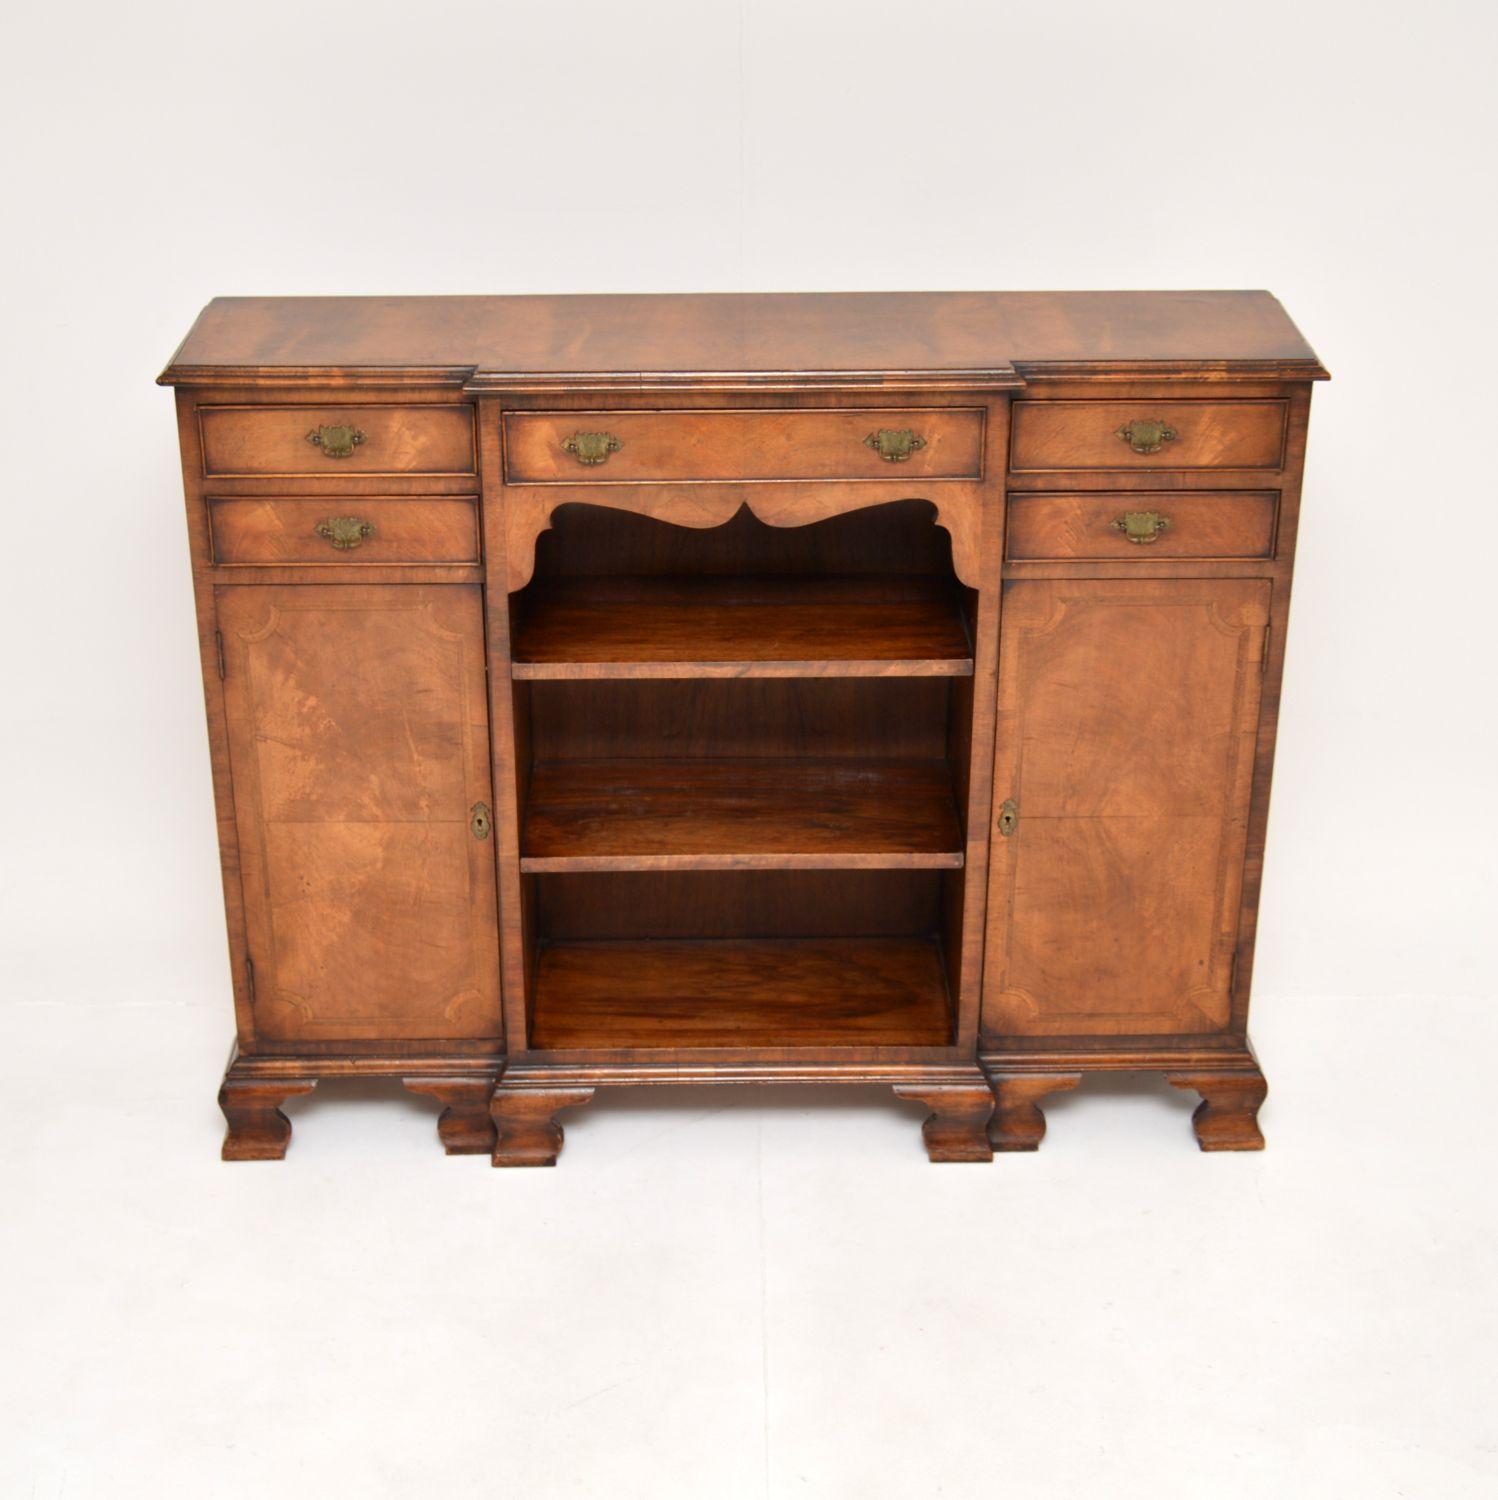 A smart and very well made antique inlaid walnut breakfront bookcase. This was made in England, it dates from around the 1900-1920’s period.

It is of lovely quality and is a very useful size, it is low and slim, yet offering lots of storage space.